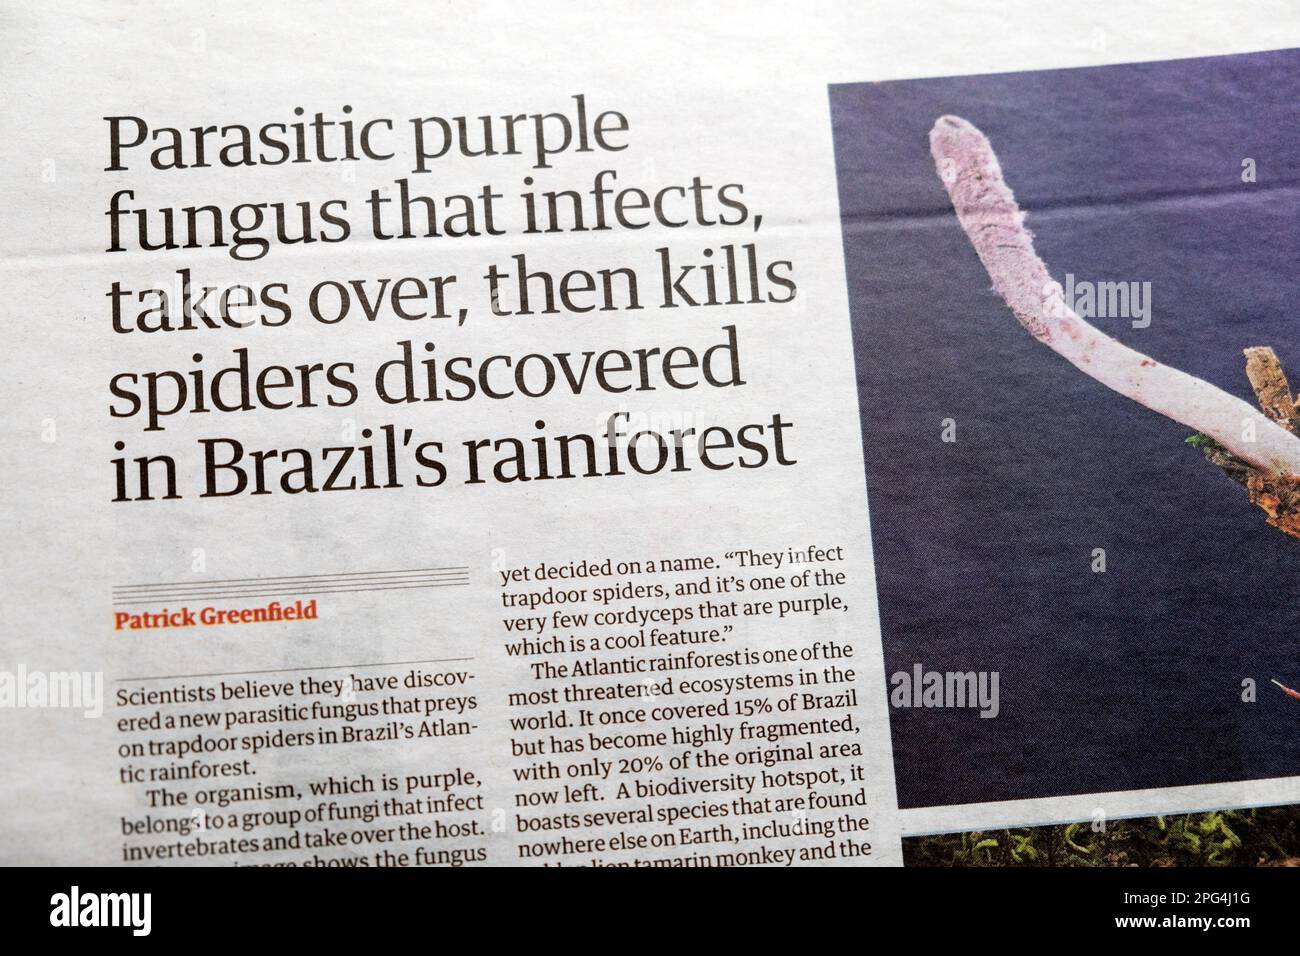 'Parasitic purple fungus that infects, takes over, then kills spiders discovered in Brazil's rainforest' Guardian newspaper headline article London UK Stock Photo